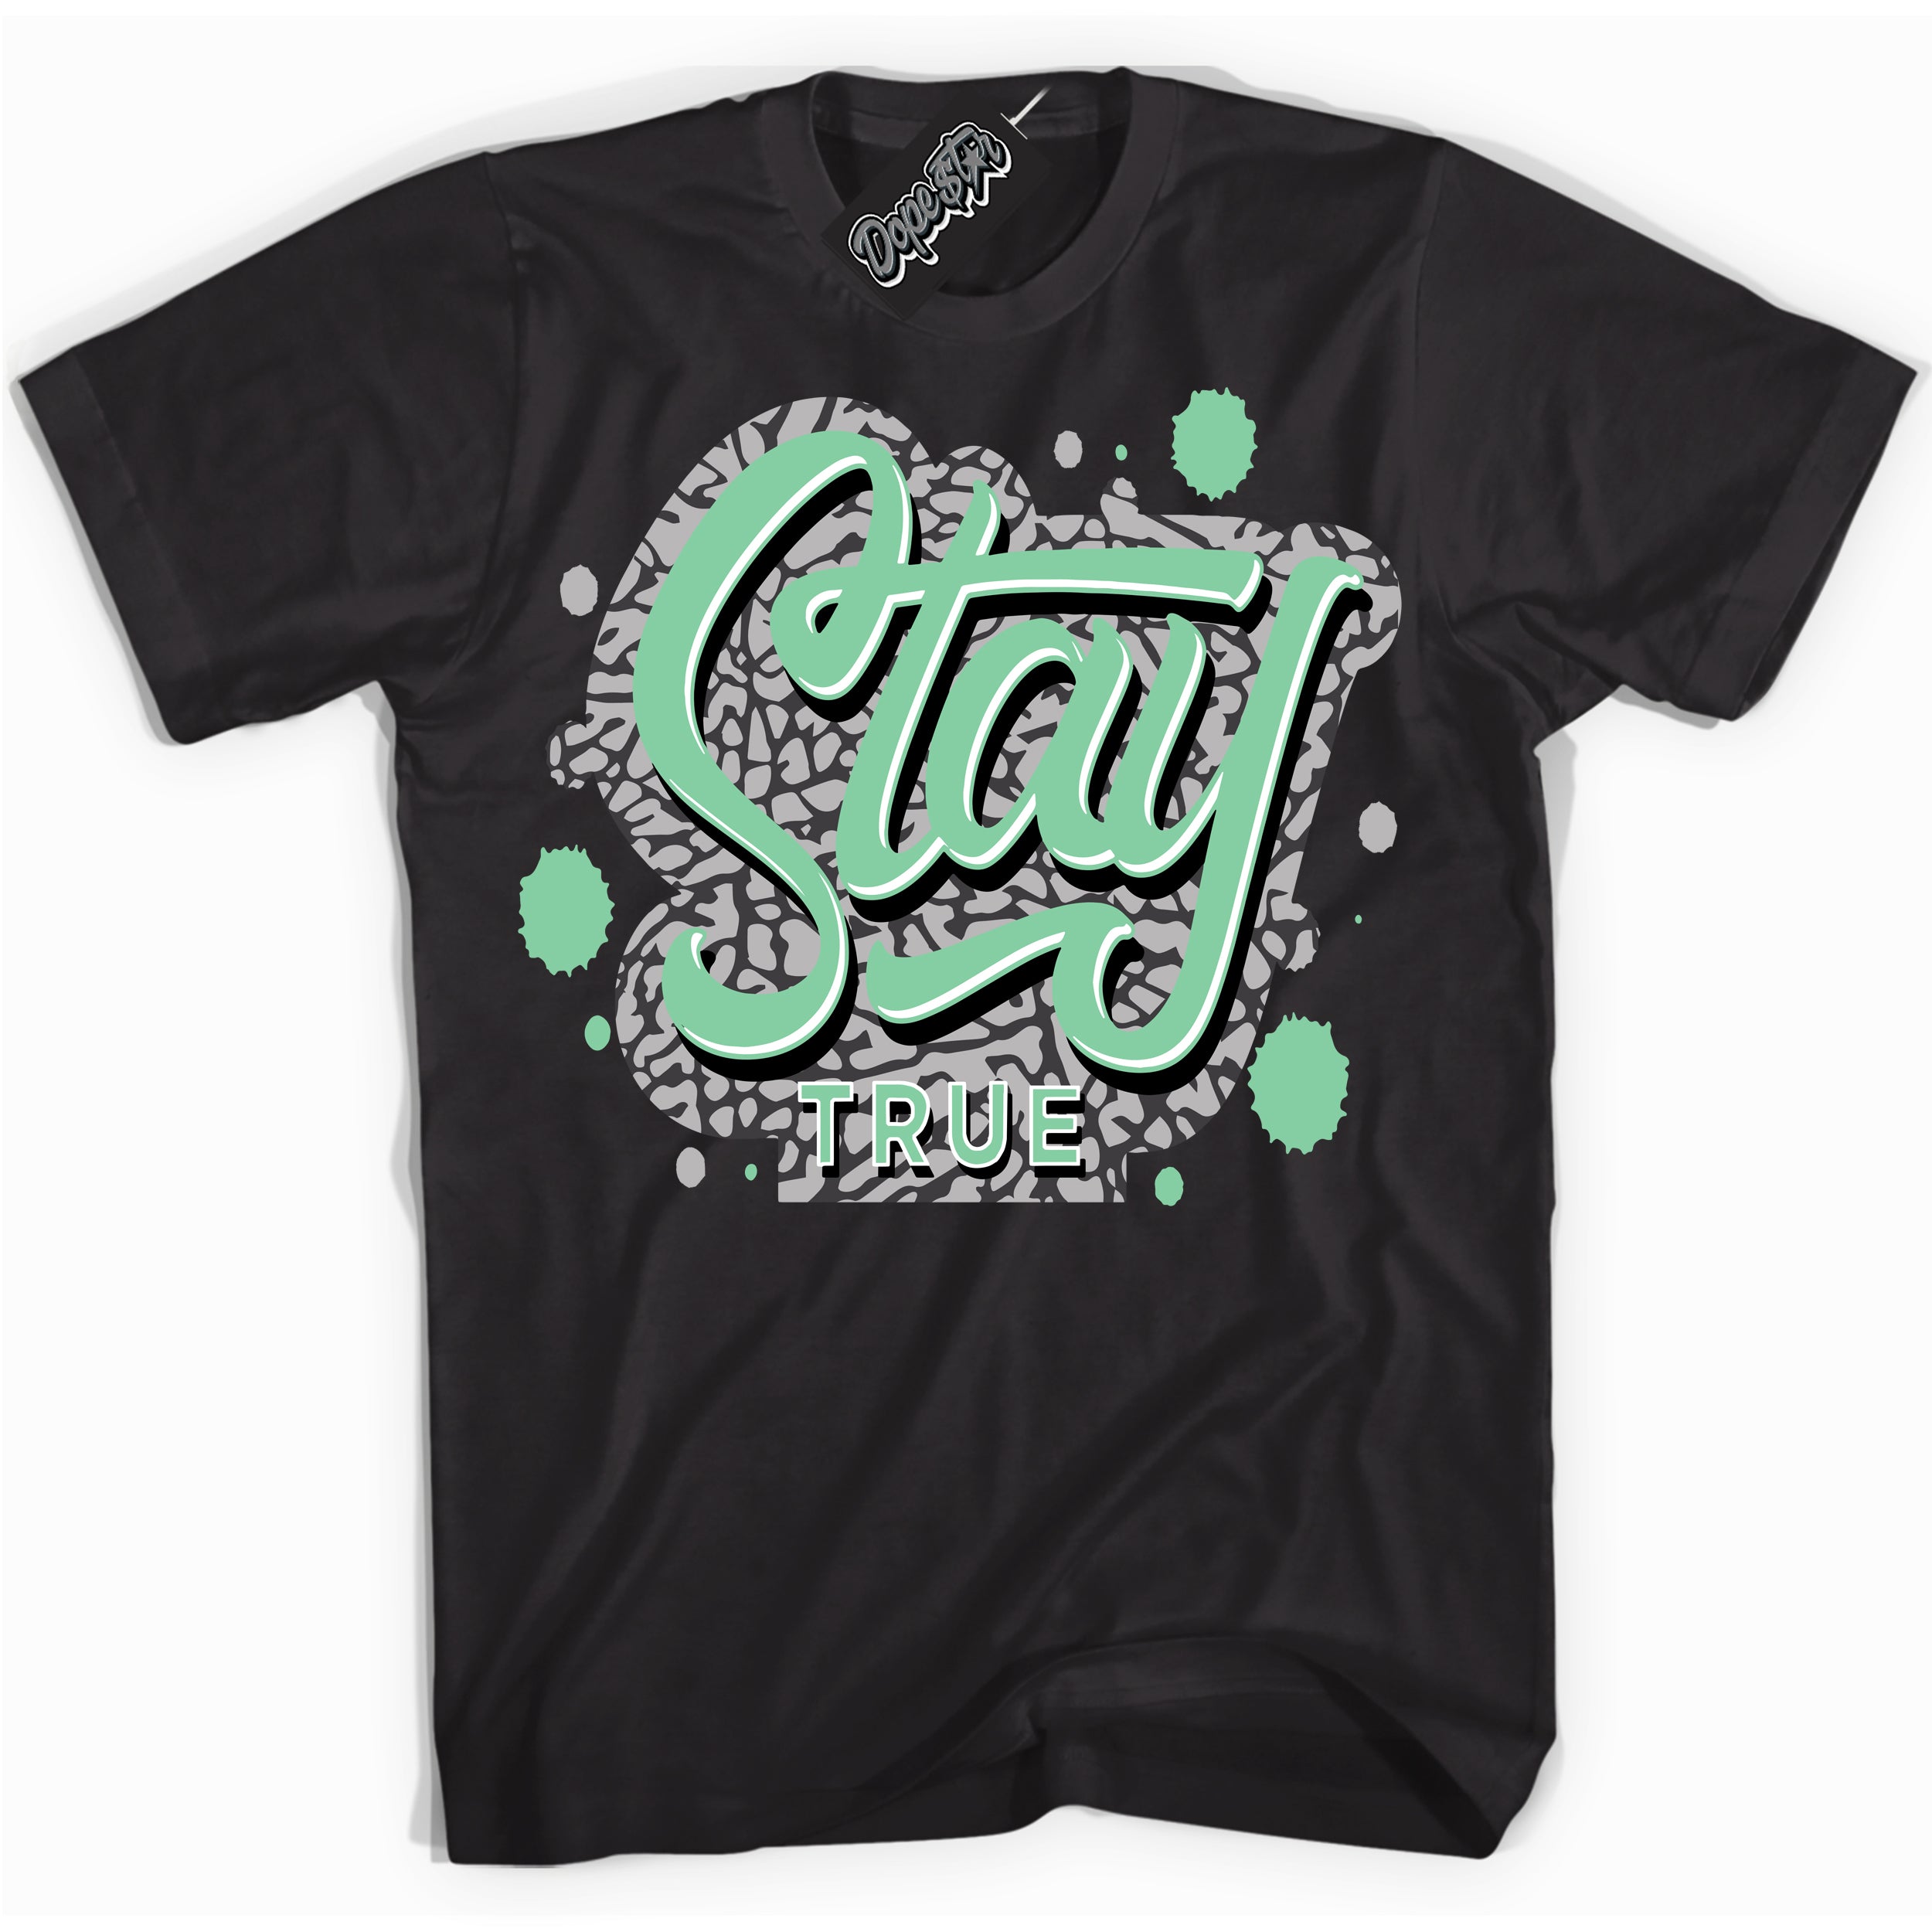 Cool Black graphic tee with “ Stay True ” design, that perfectly matches Green Glow 3s sneakers 